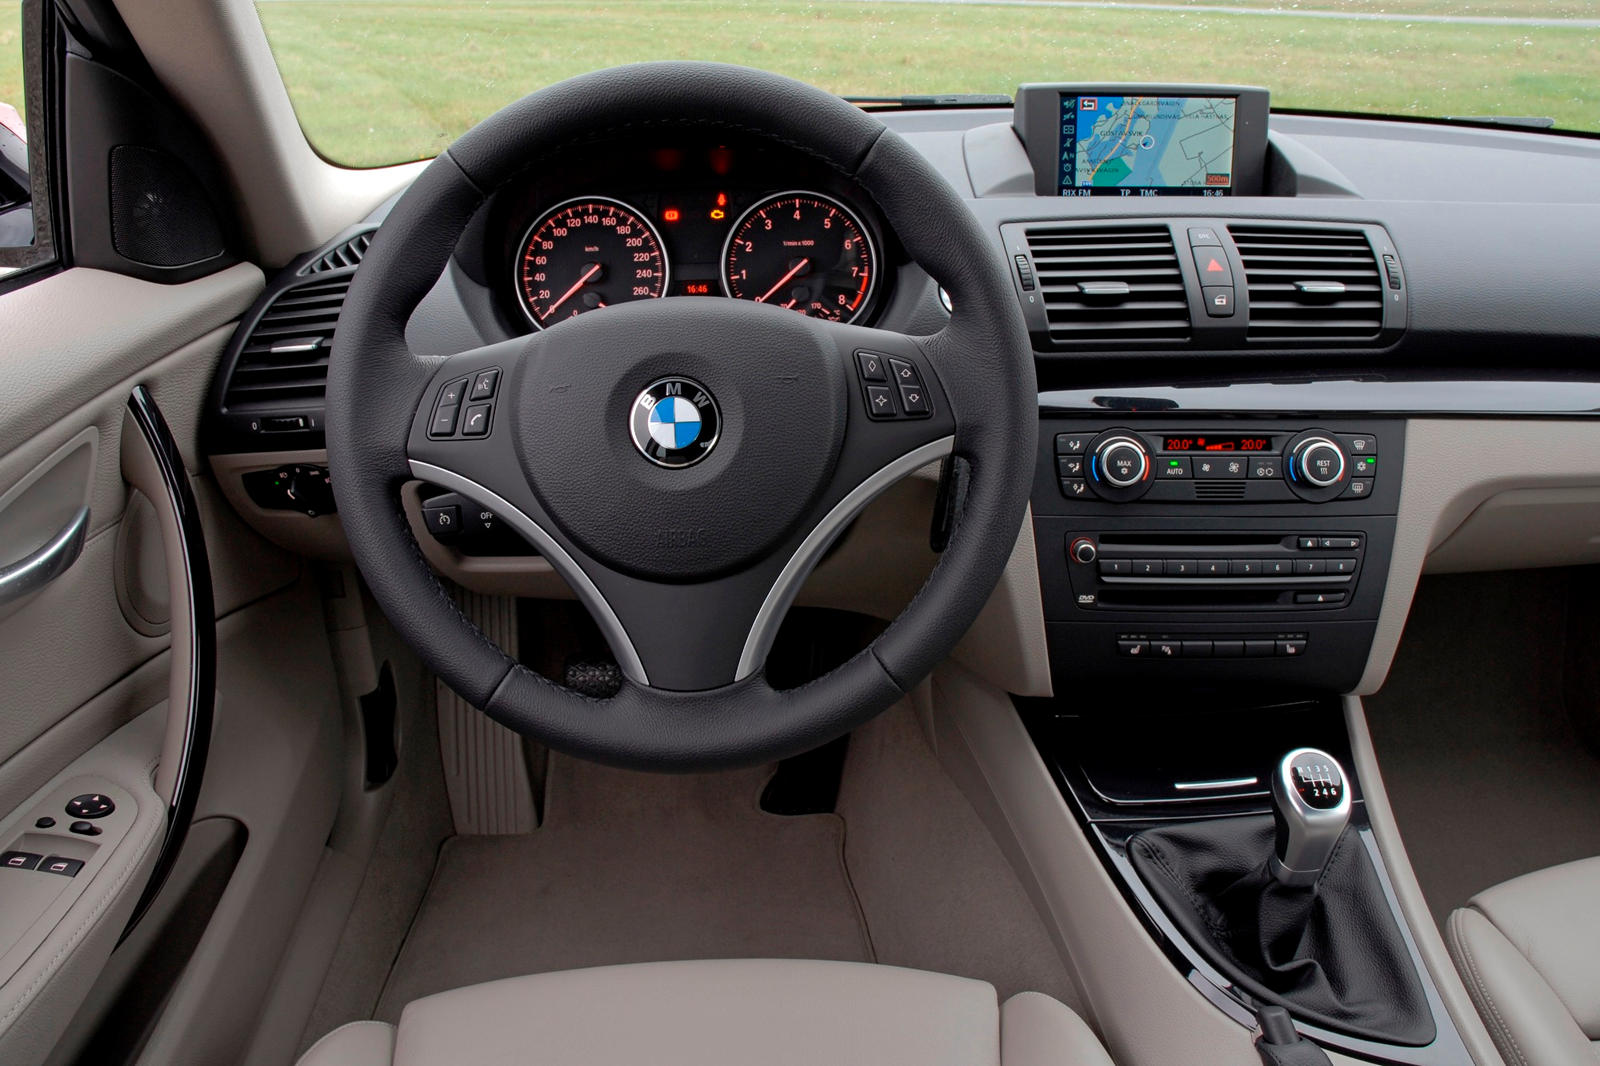 Approval brand Diversity 2009 BMW 1 Series Coupe Interior Photos | CarBuzz